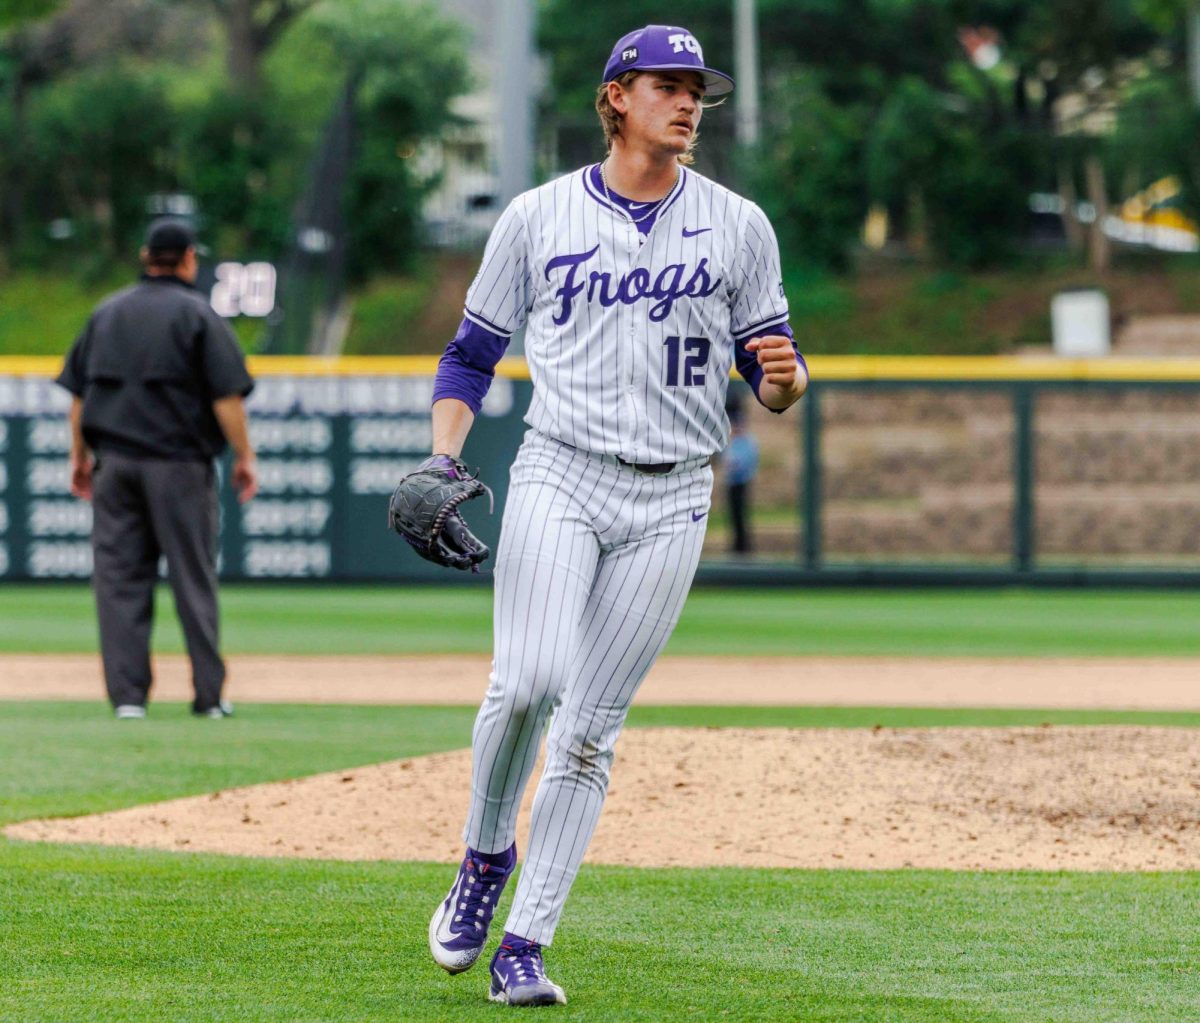 TCU pitcher Ben Abeldt celebrates with a fist pump after getting the last out of the game at Lupton Stadium in Fort Worth, Texas on April 27th, 2024. The TCU Horned Frogs beat the Kansas State Wildcats 7-4 in game 1 of the doubleheader. (TCU360/Tyler Chan)